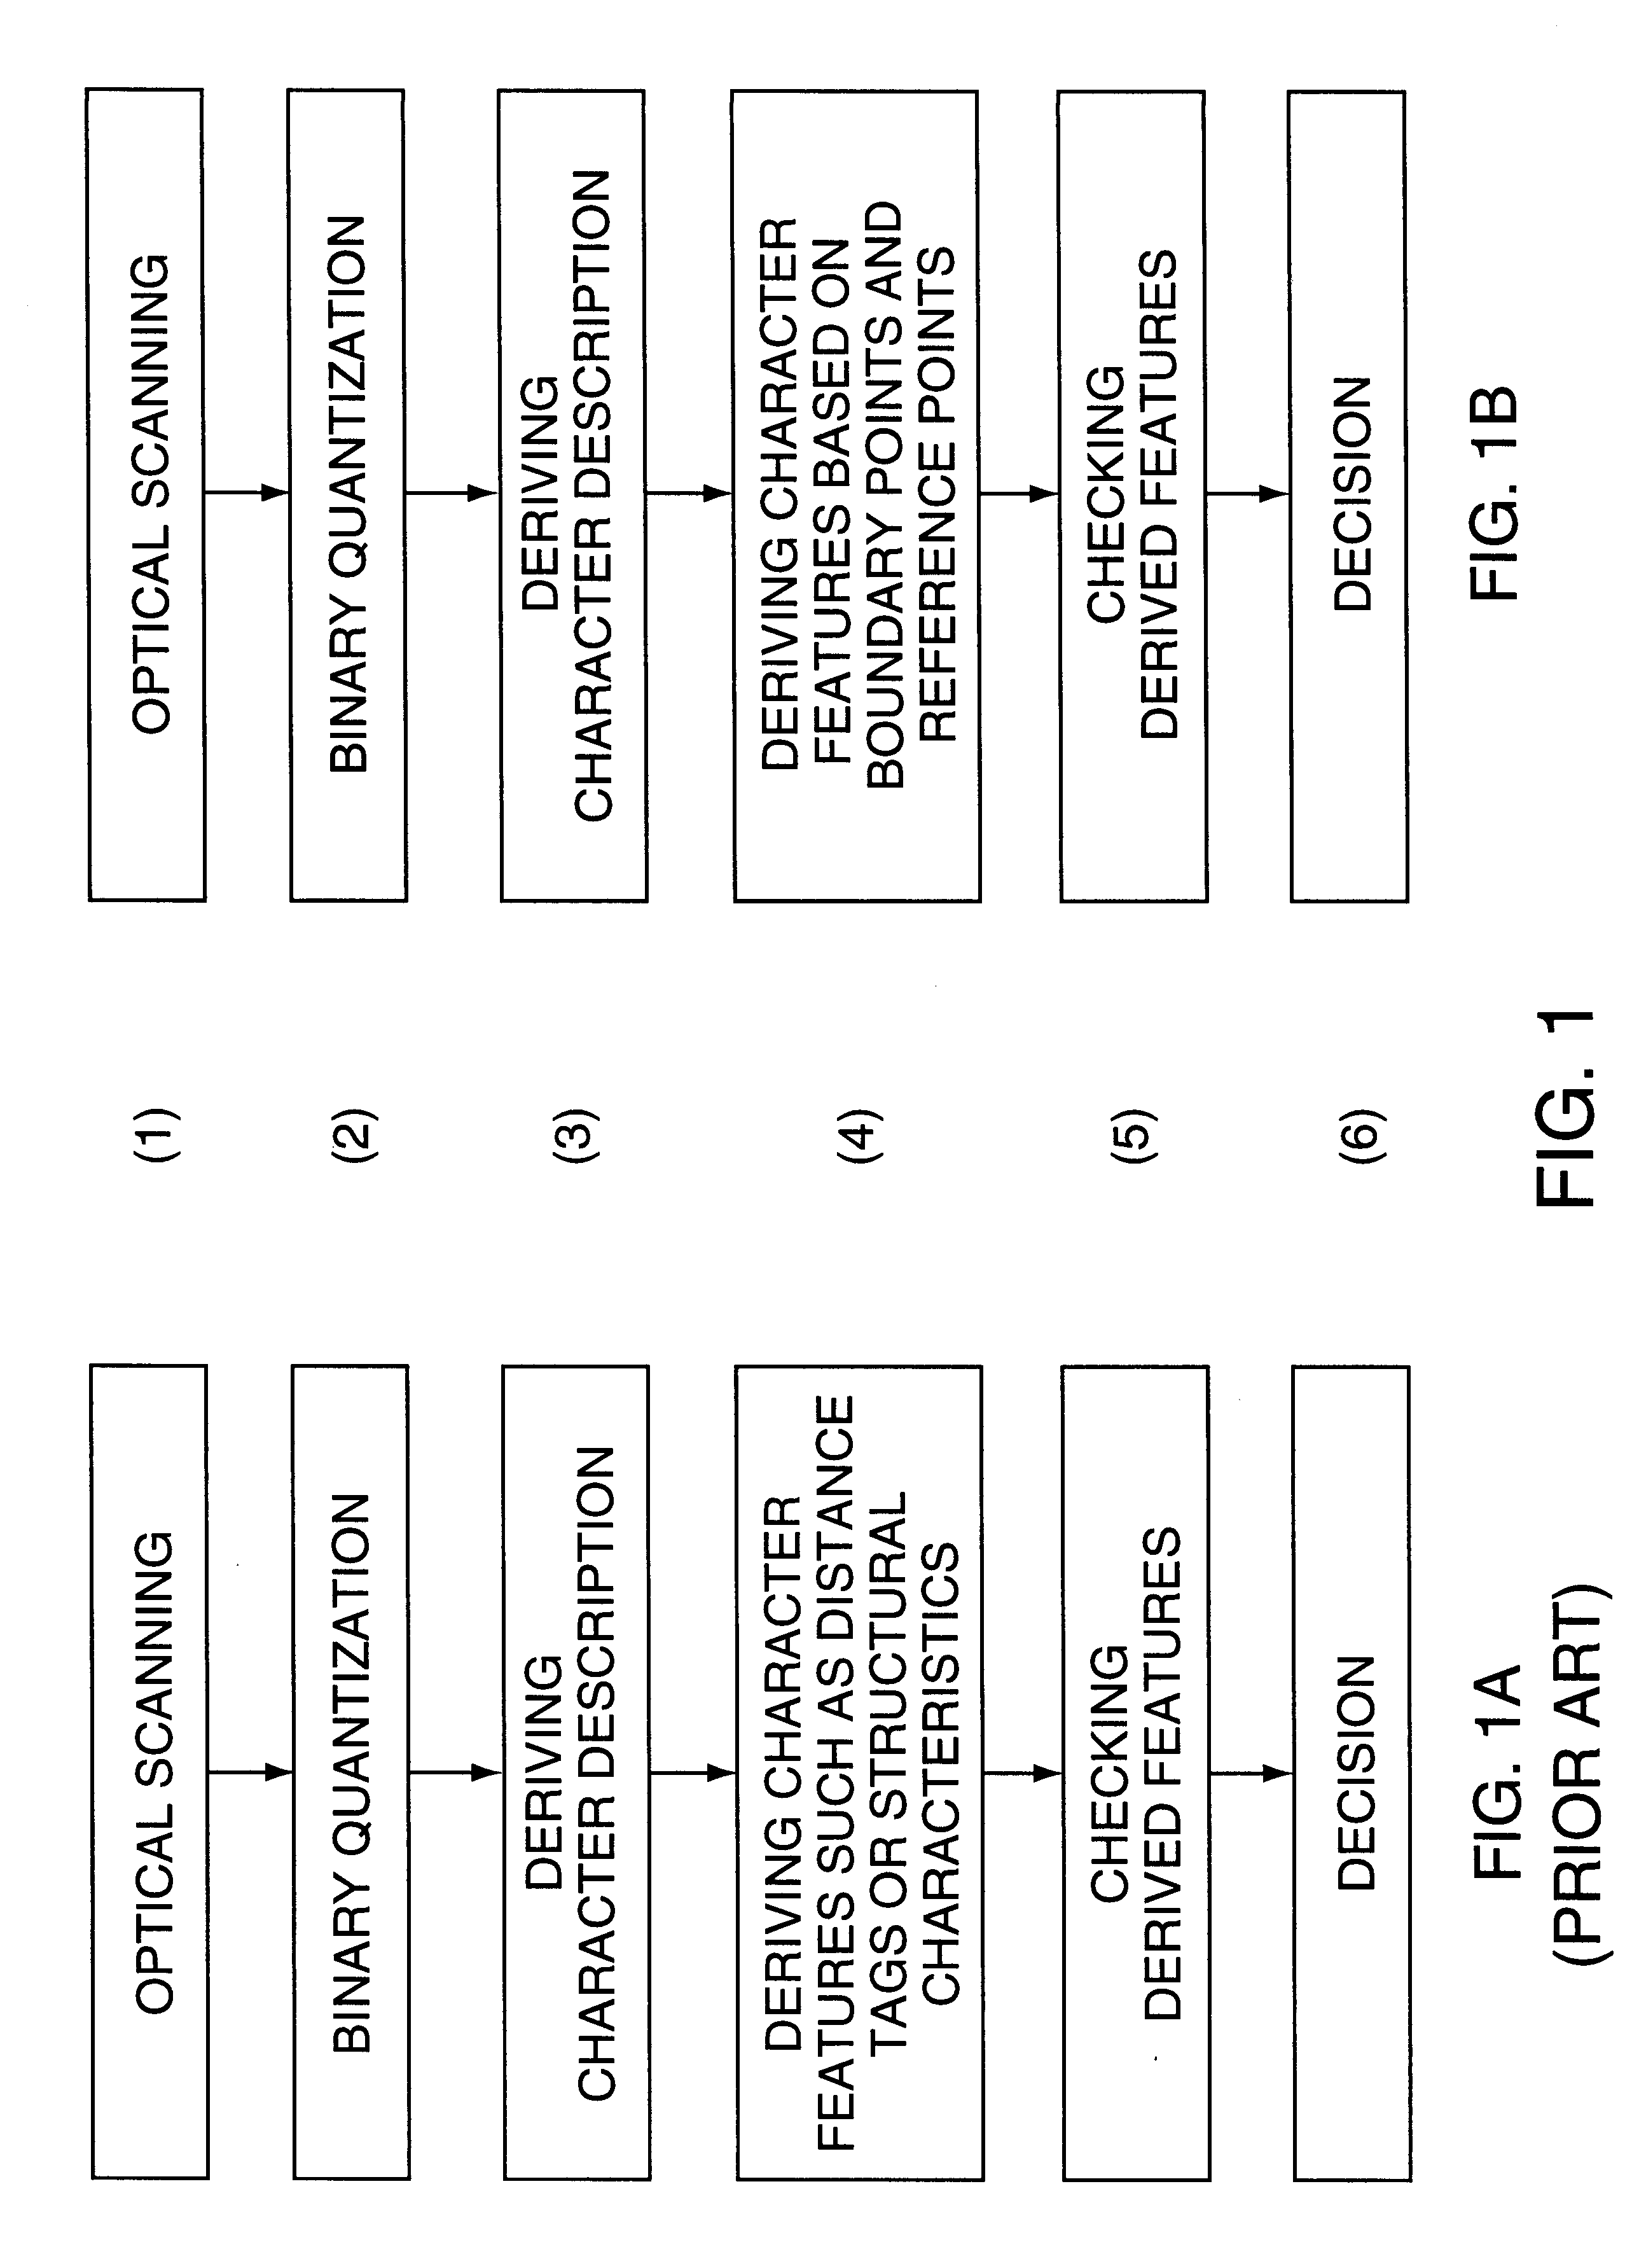 Method for deriving character features in a character recognition system